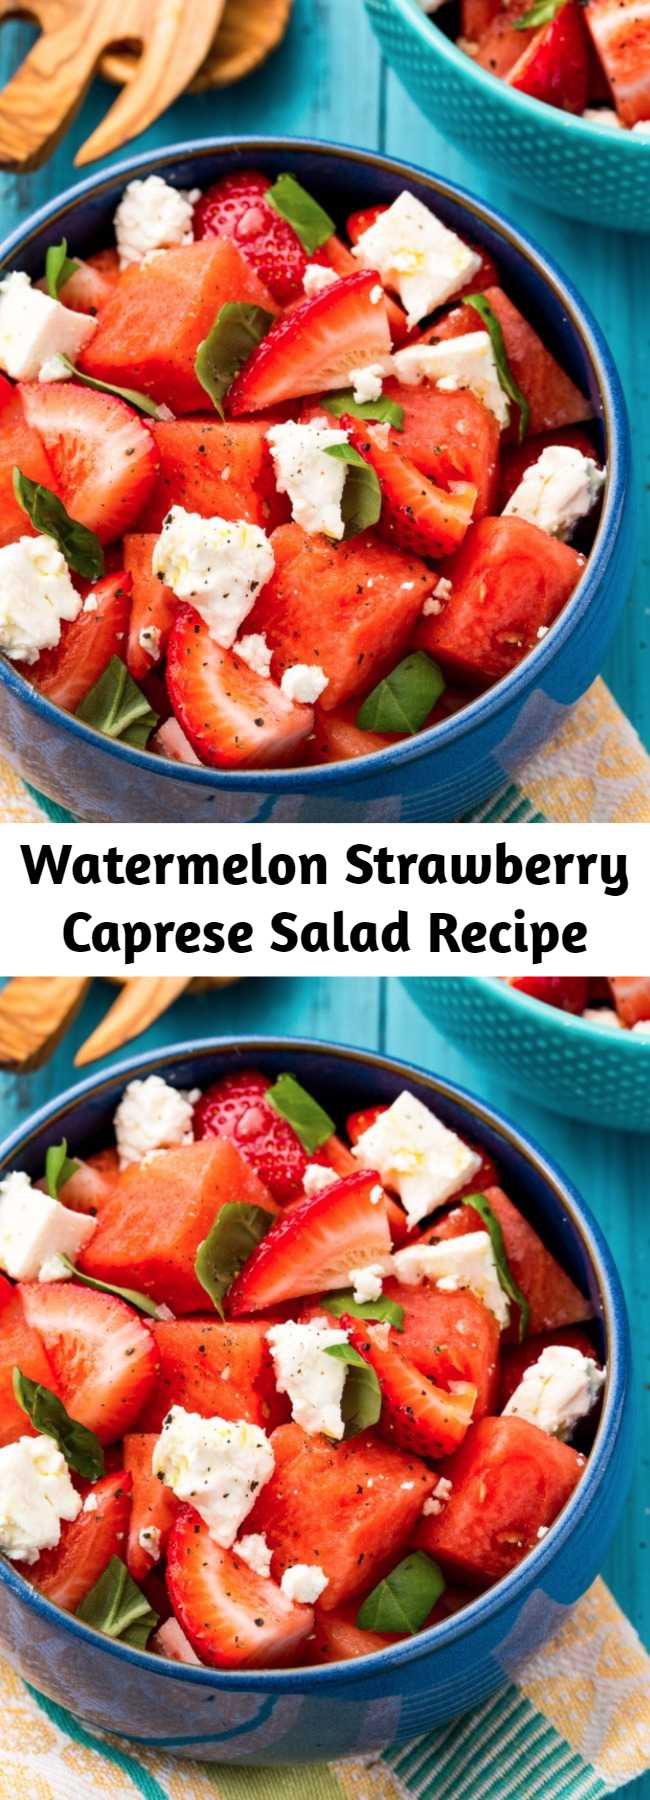 Watermelon Strawberry Caprese Salad Recipe - Switch up your summer salad game with this Watermelon Strawberry Caprese. Your guests are sure to go wild for this one.